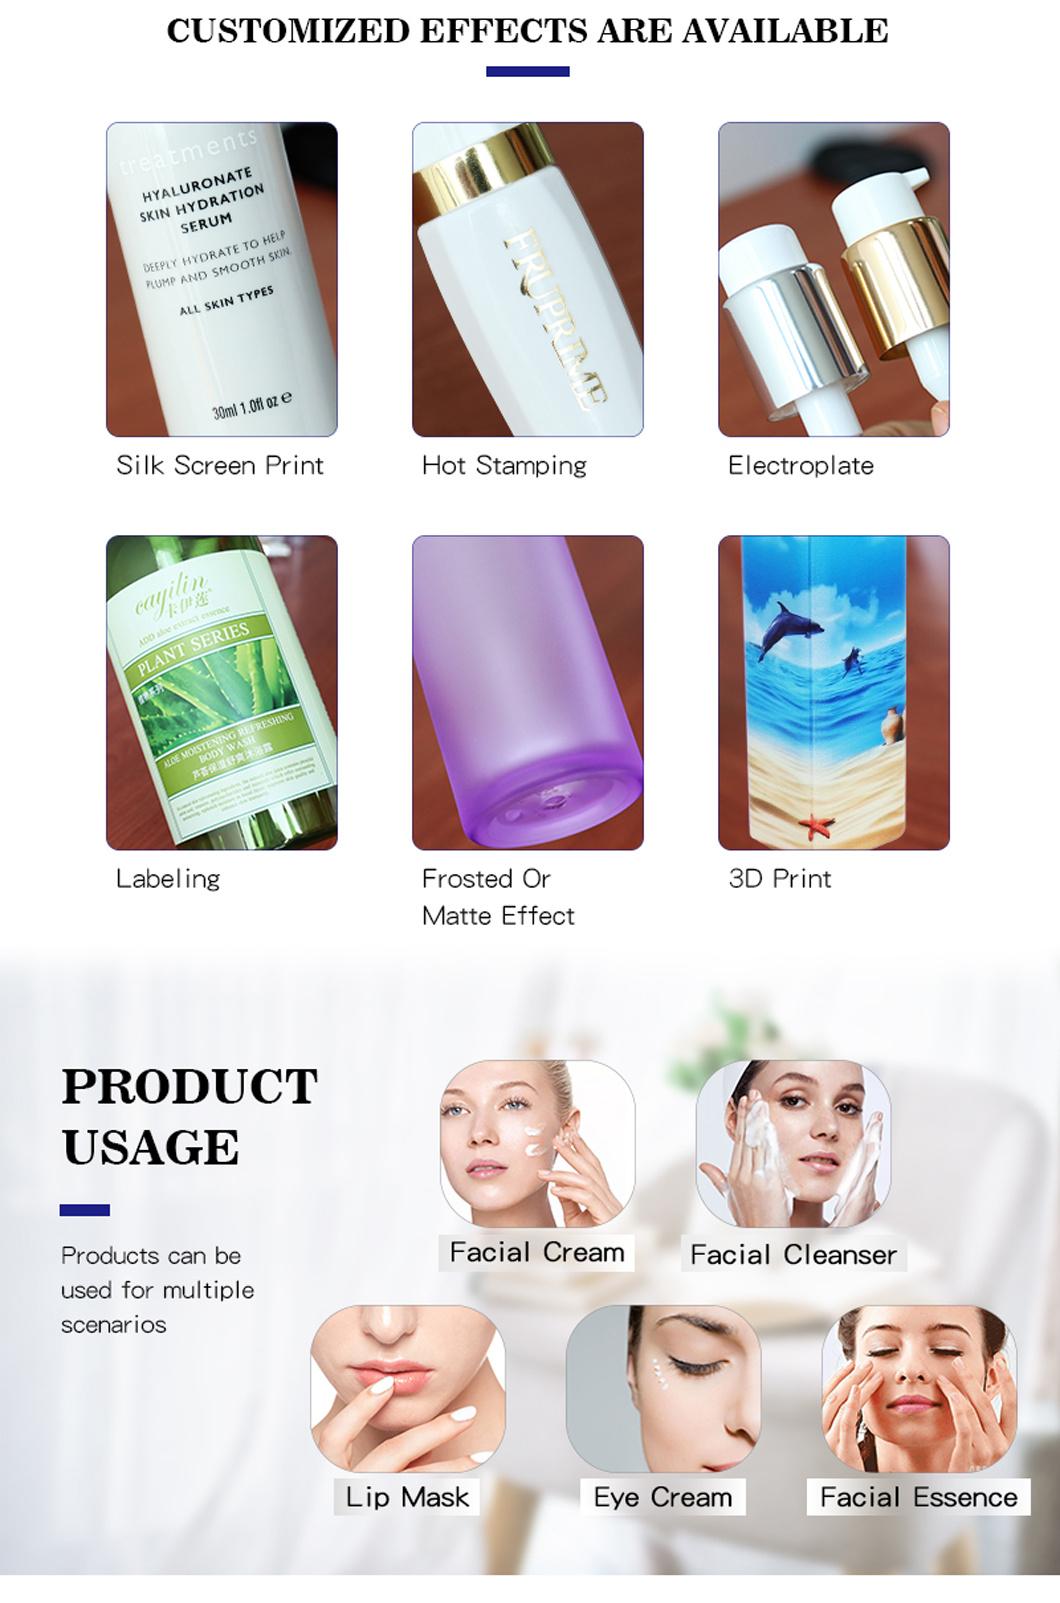 Skincare Cosmetic Packaging 30ml 80ml 120ml Blue Glass Lotion Pump Face Lotion Cream Bottle